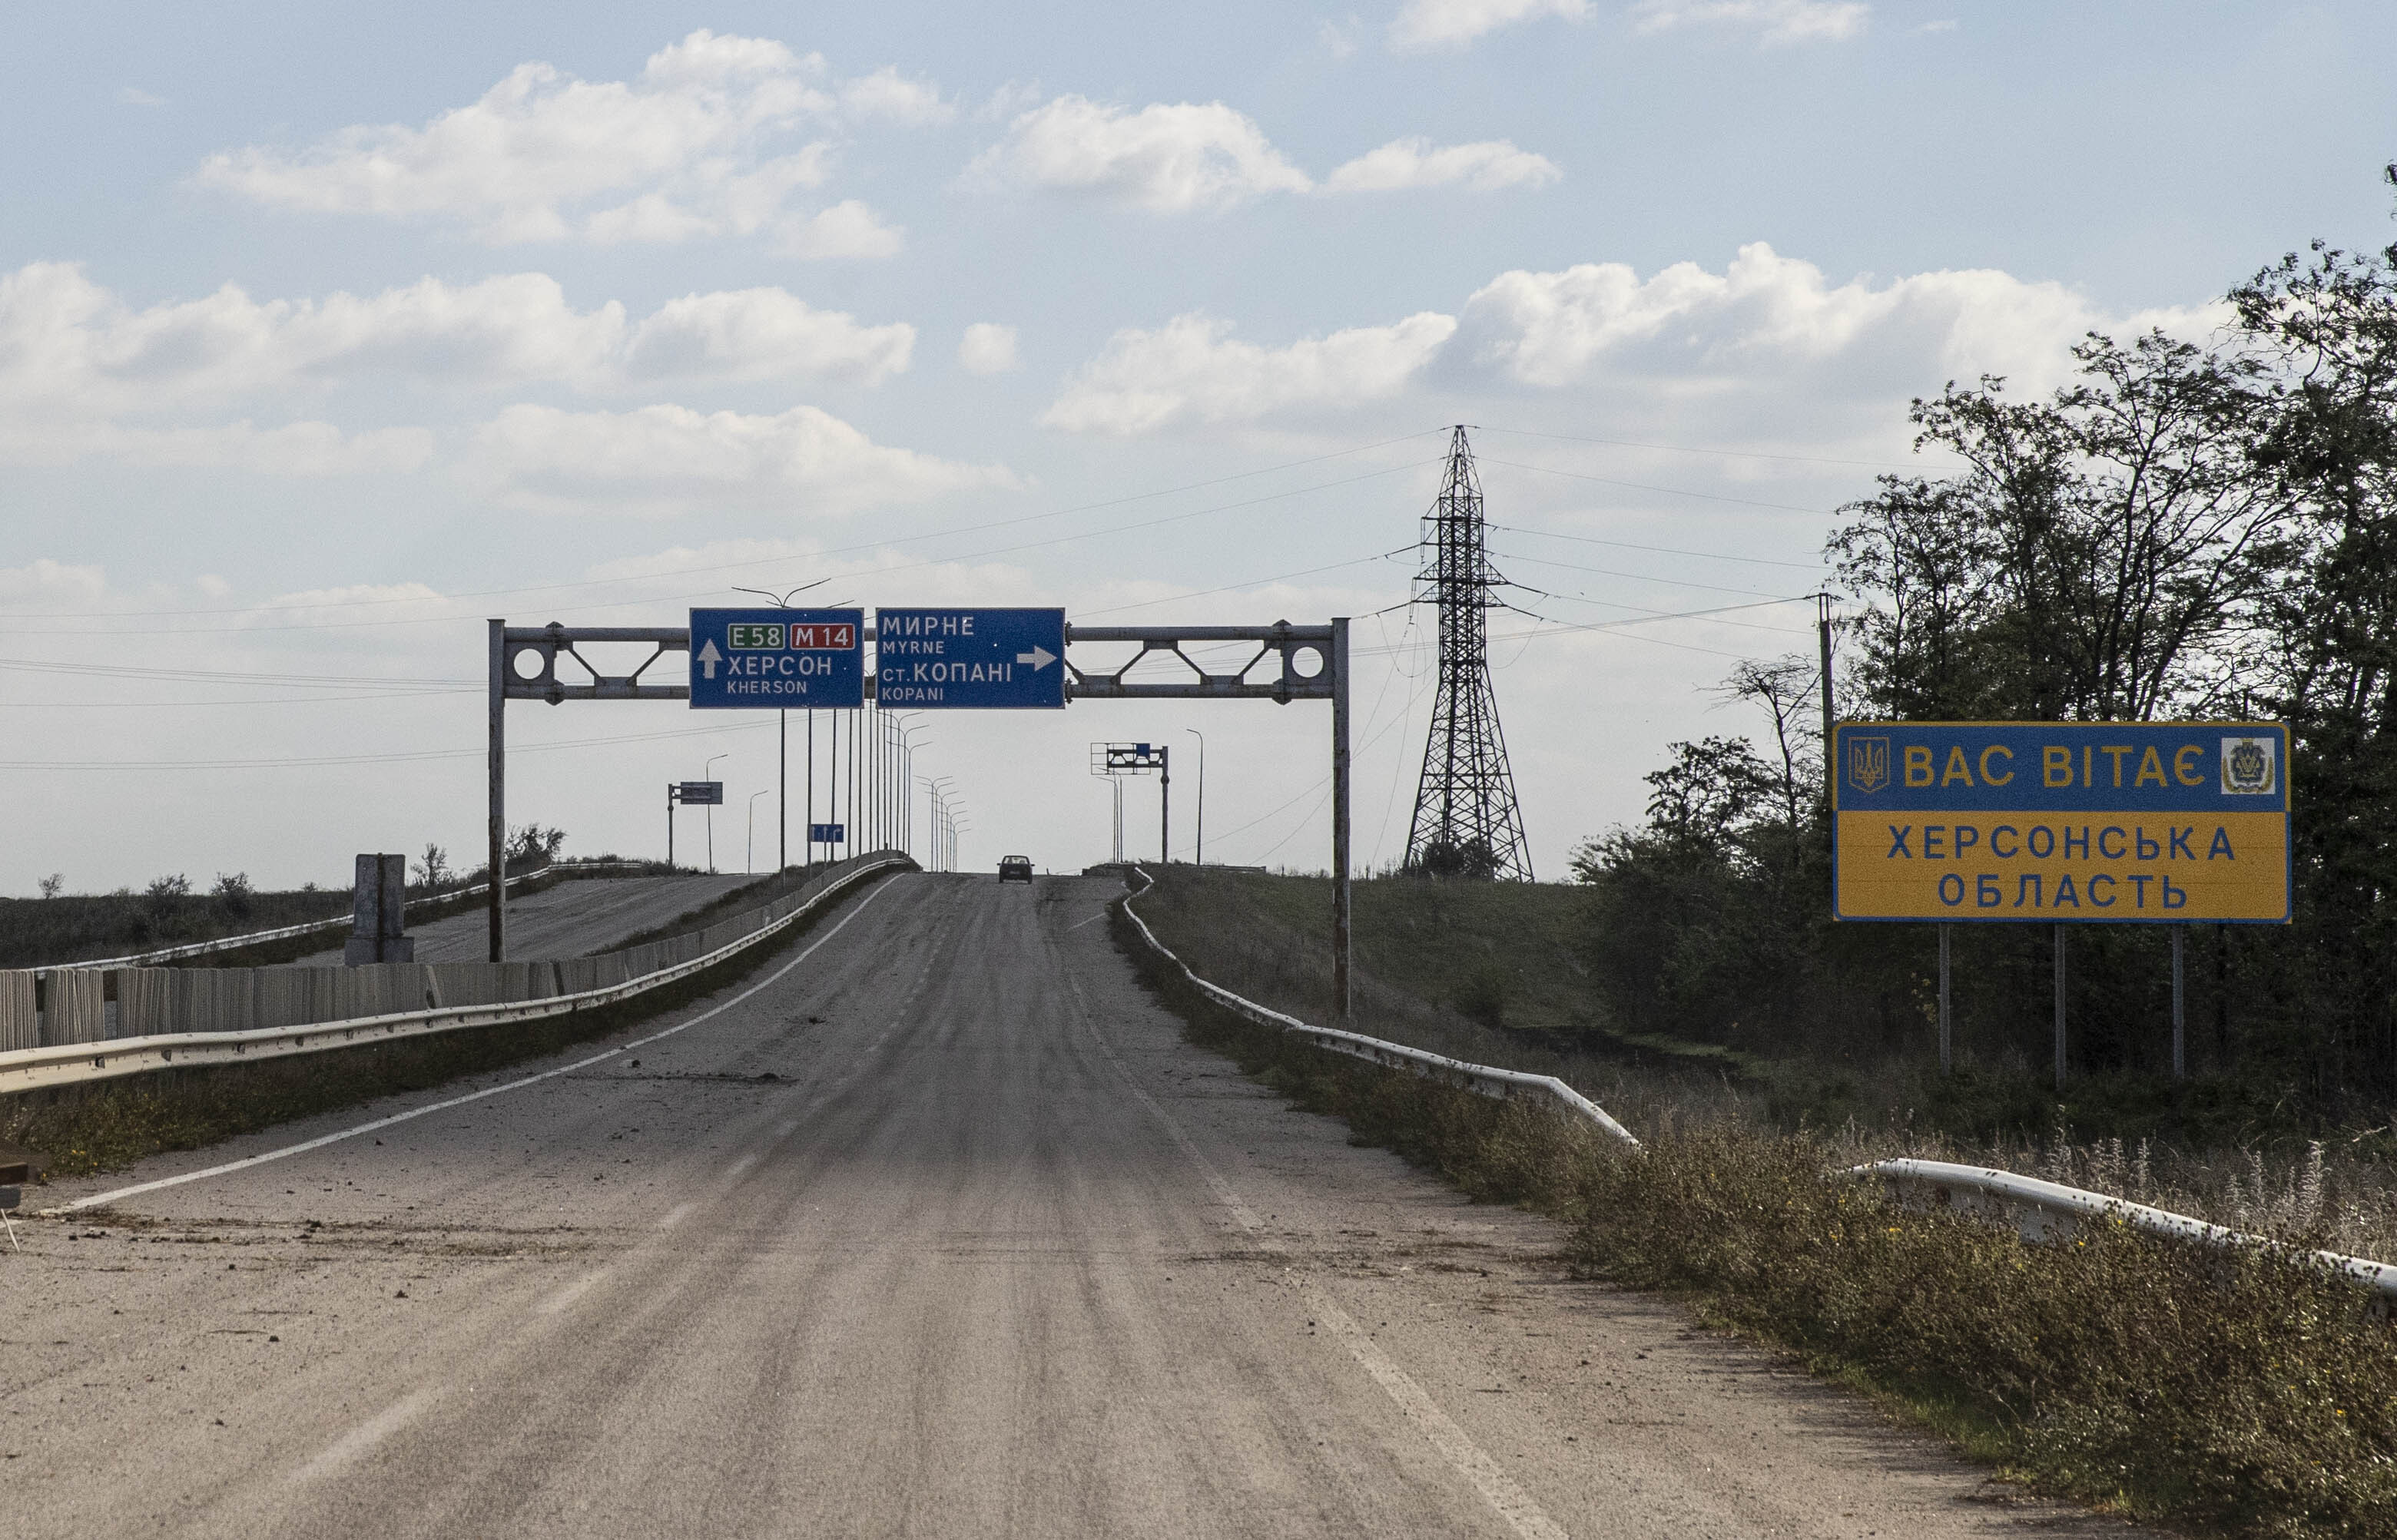 As Ukraine sets its sights on liberating Kherson, Russian proxies try to push people out